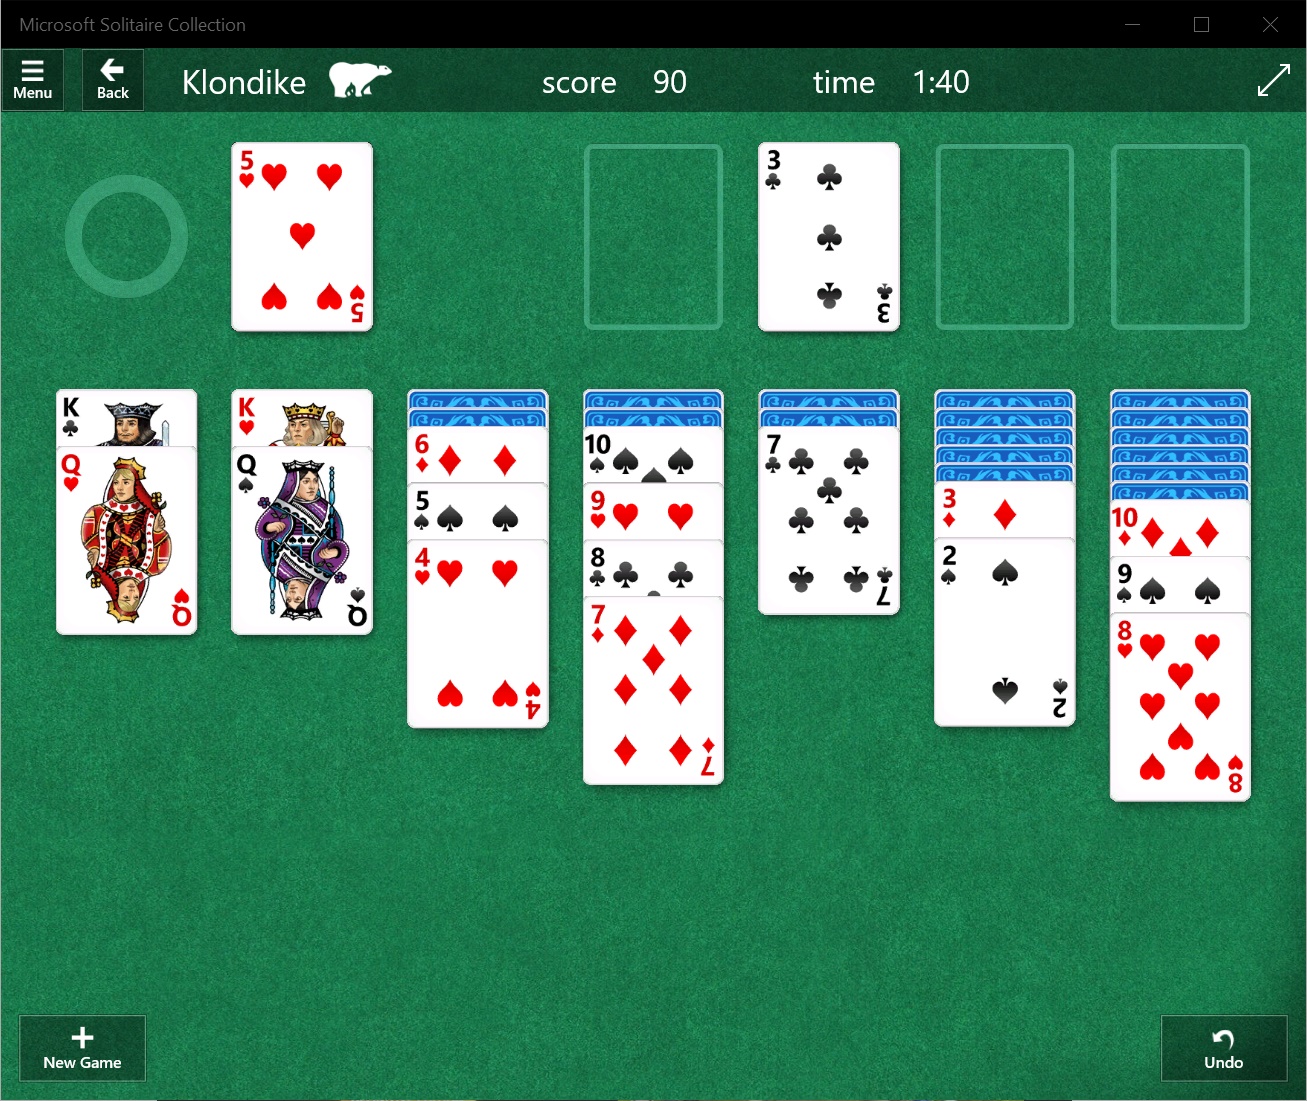 microsoft solitaire collection klondike 12/22/18